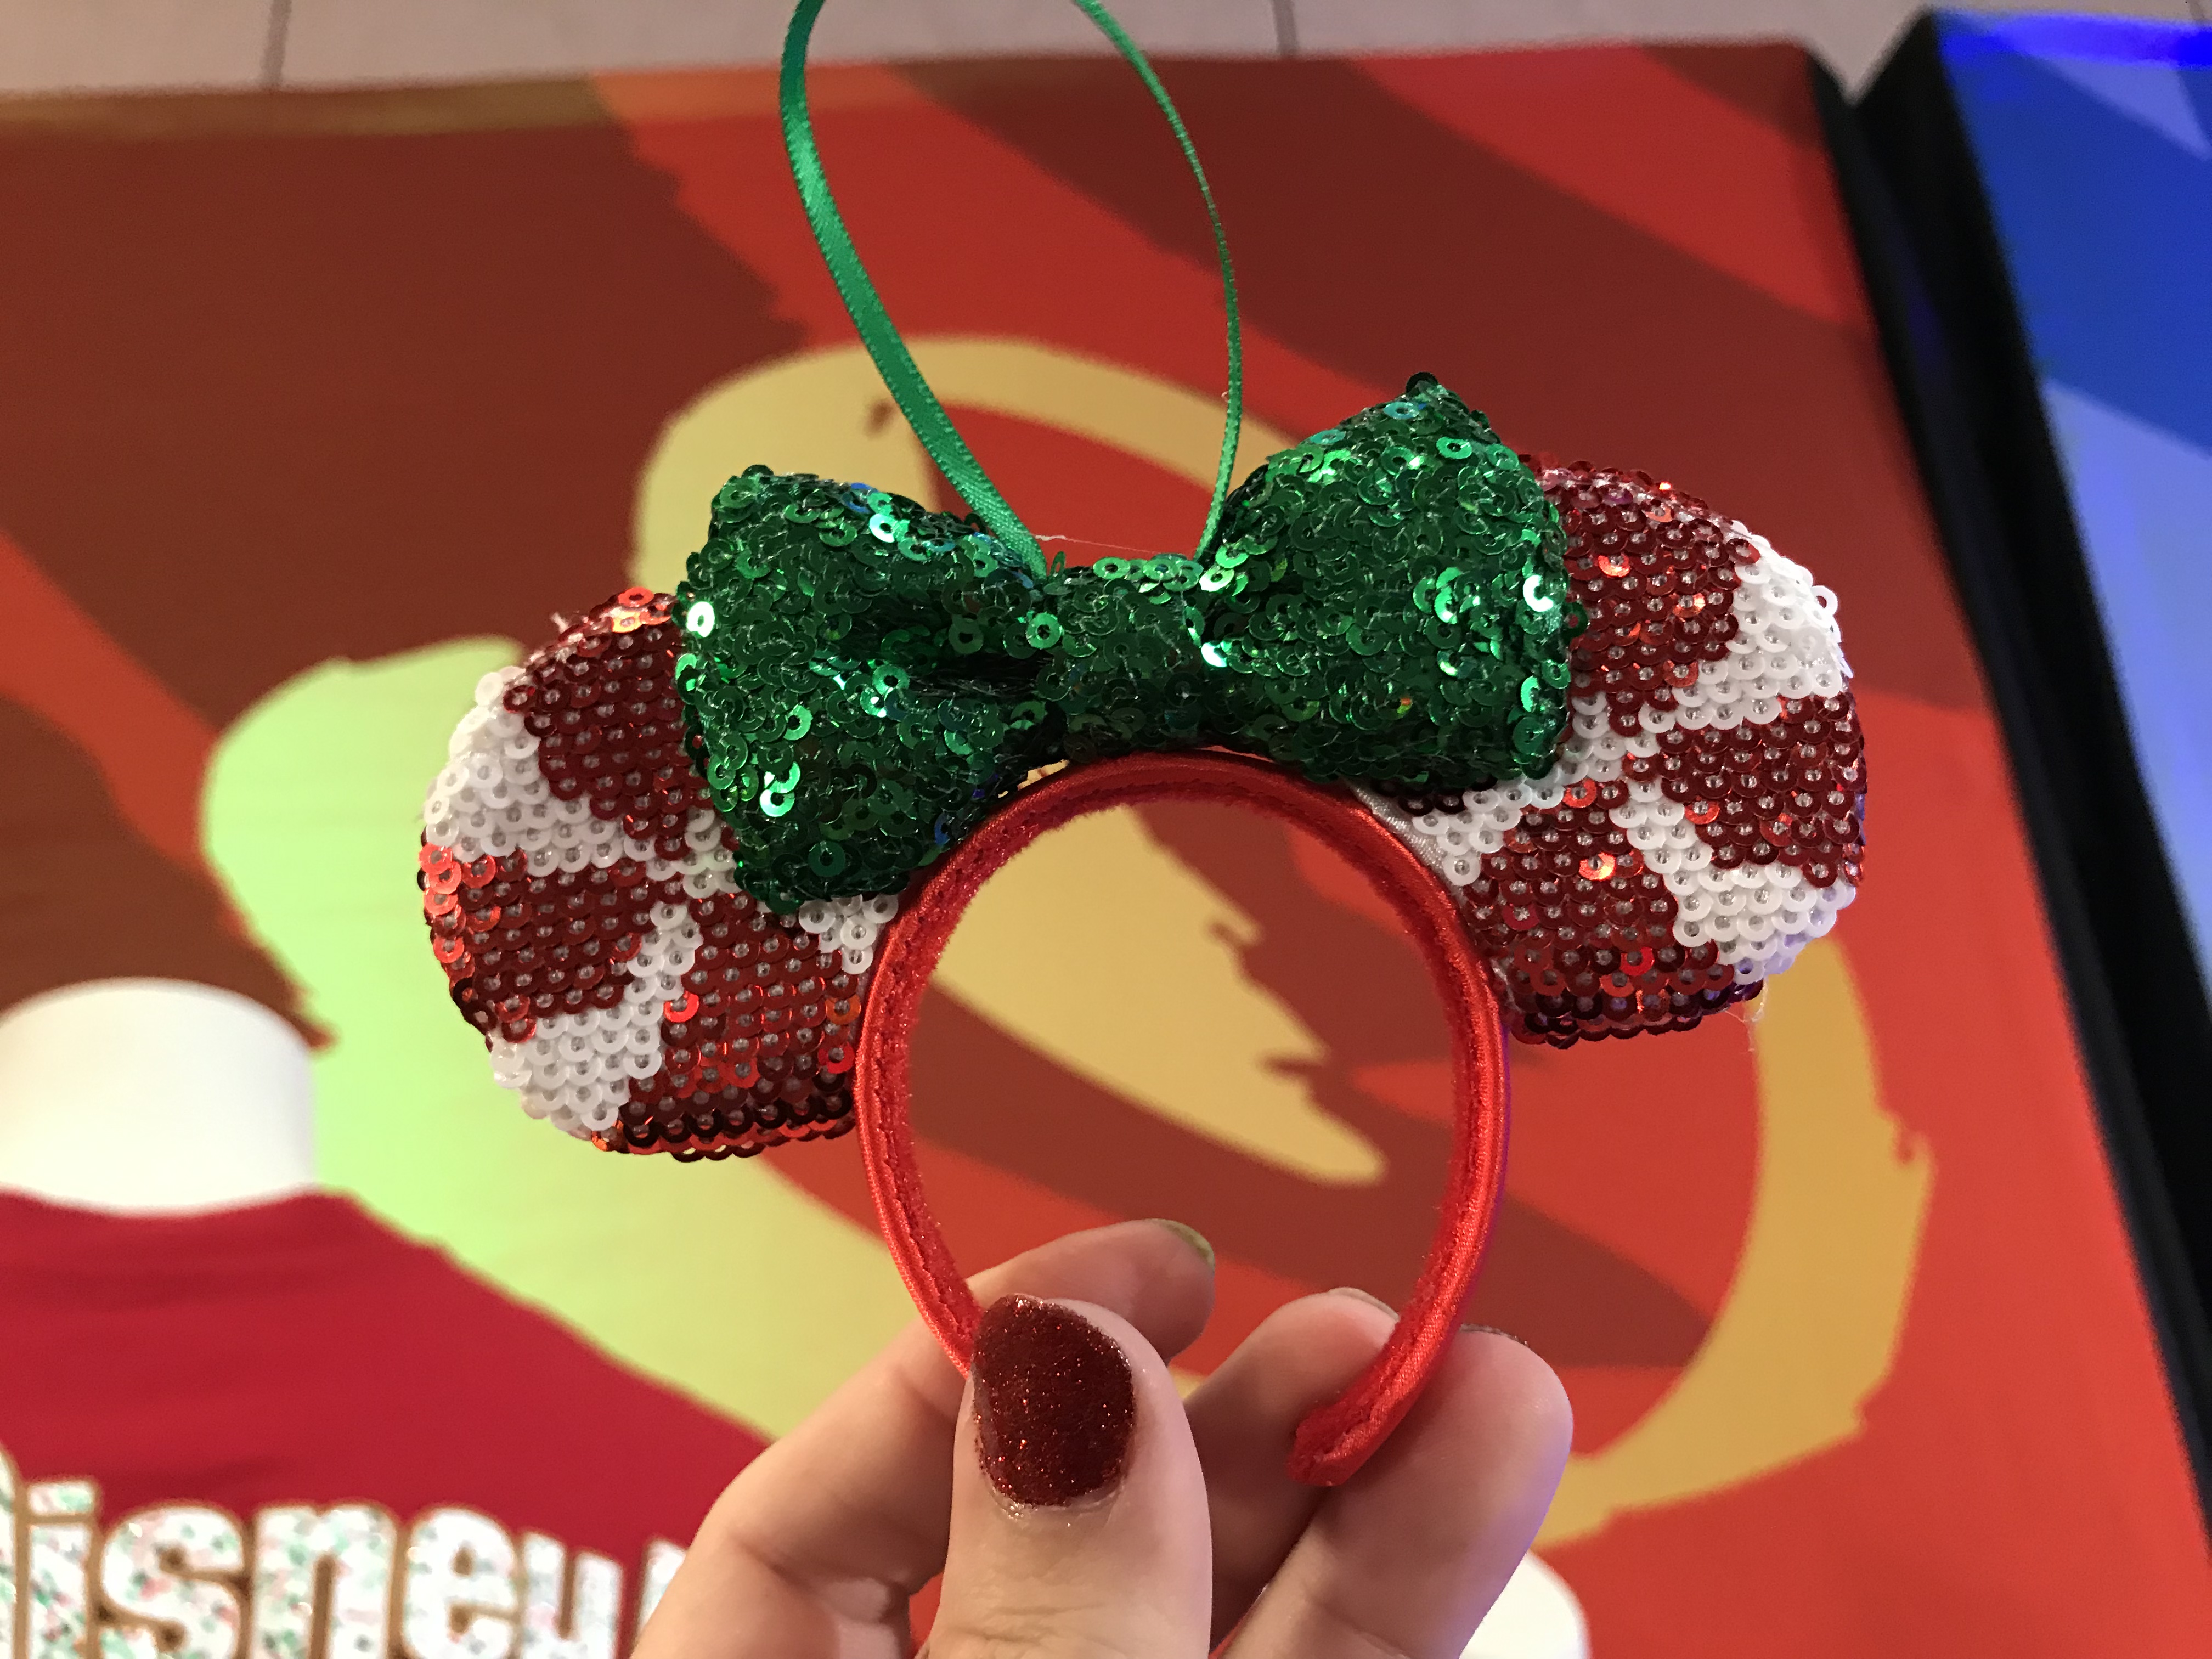 Fabulous Disney Holiday Merchandise Revealed At Disney's Christmas In July